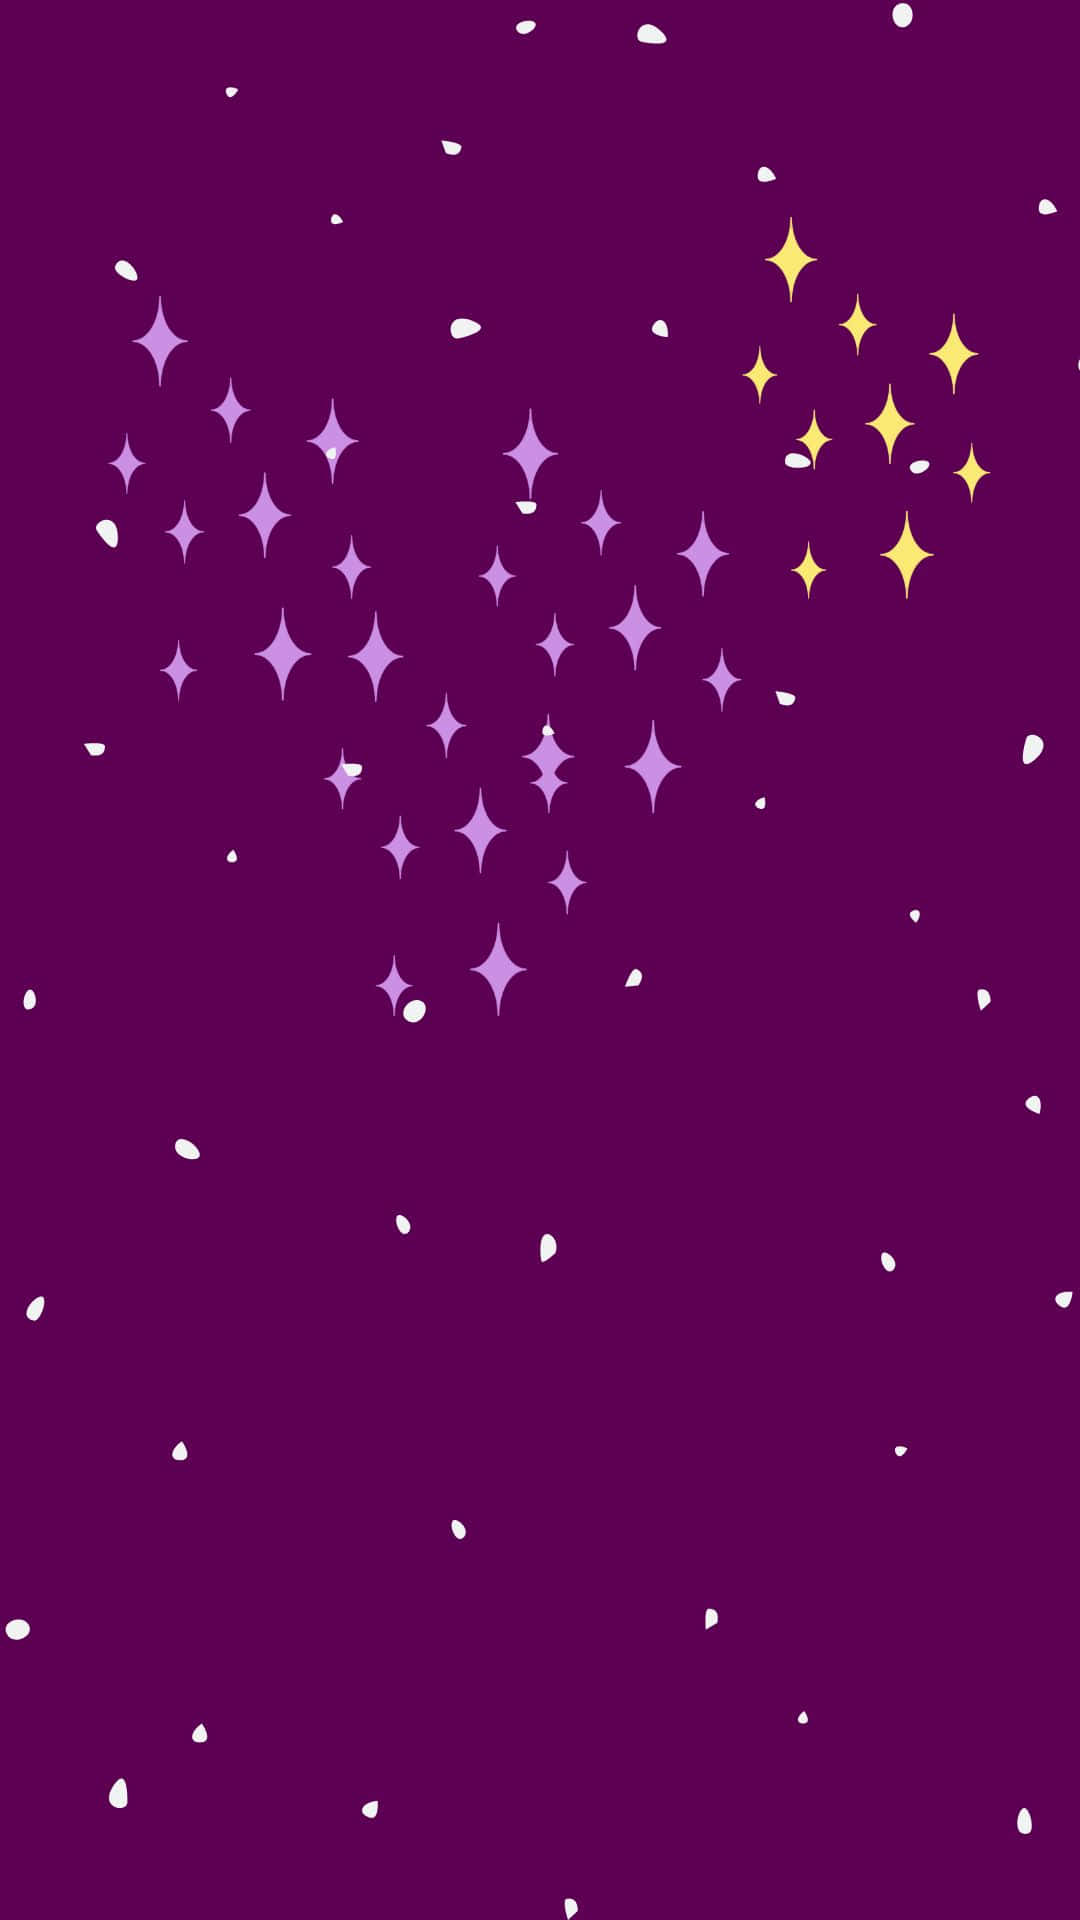 Add a touch of sparkle to your life with this beautiful Purple Sparkle background